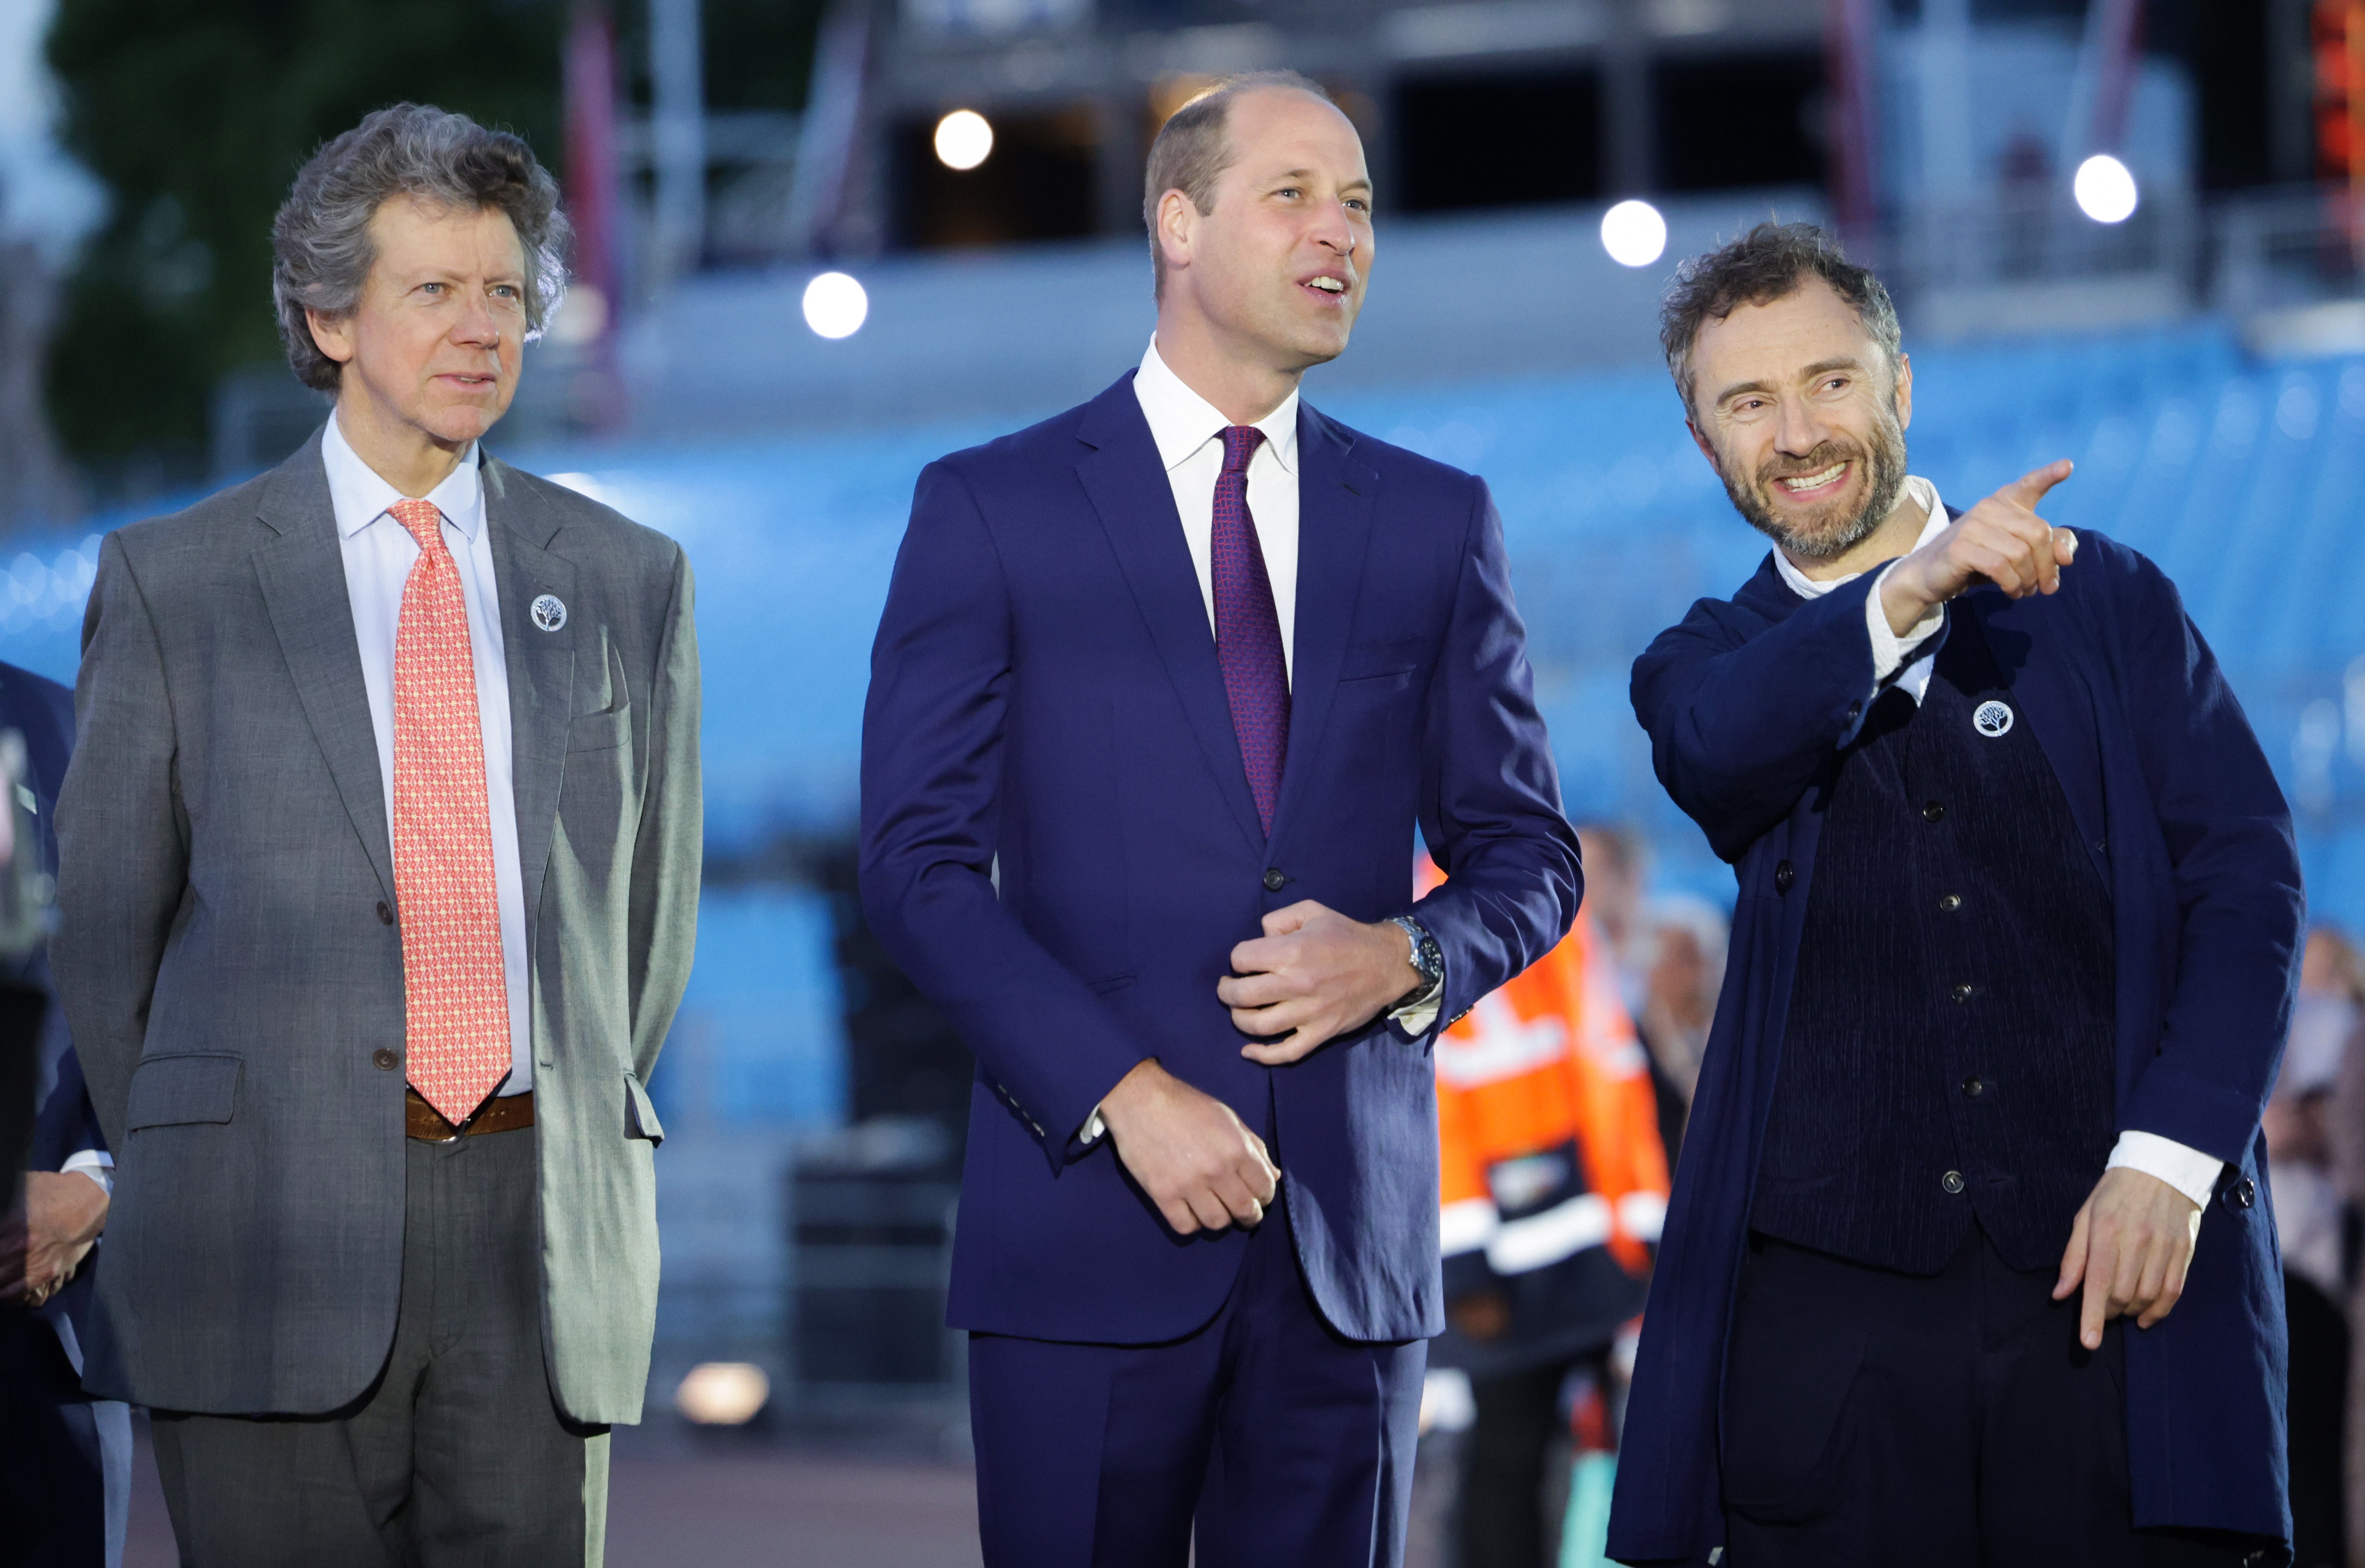 The Duke of Cambridge with Sir Nicholas Bacon and and Designer Thomas Heatherwick, during the lighting of the Principal Beacon at the “Tree of Trees” sculpture outside Buckingham Palace (Chris Jackson/PA)